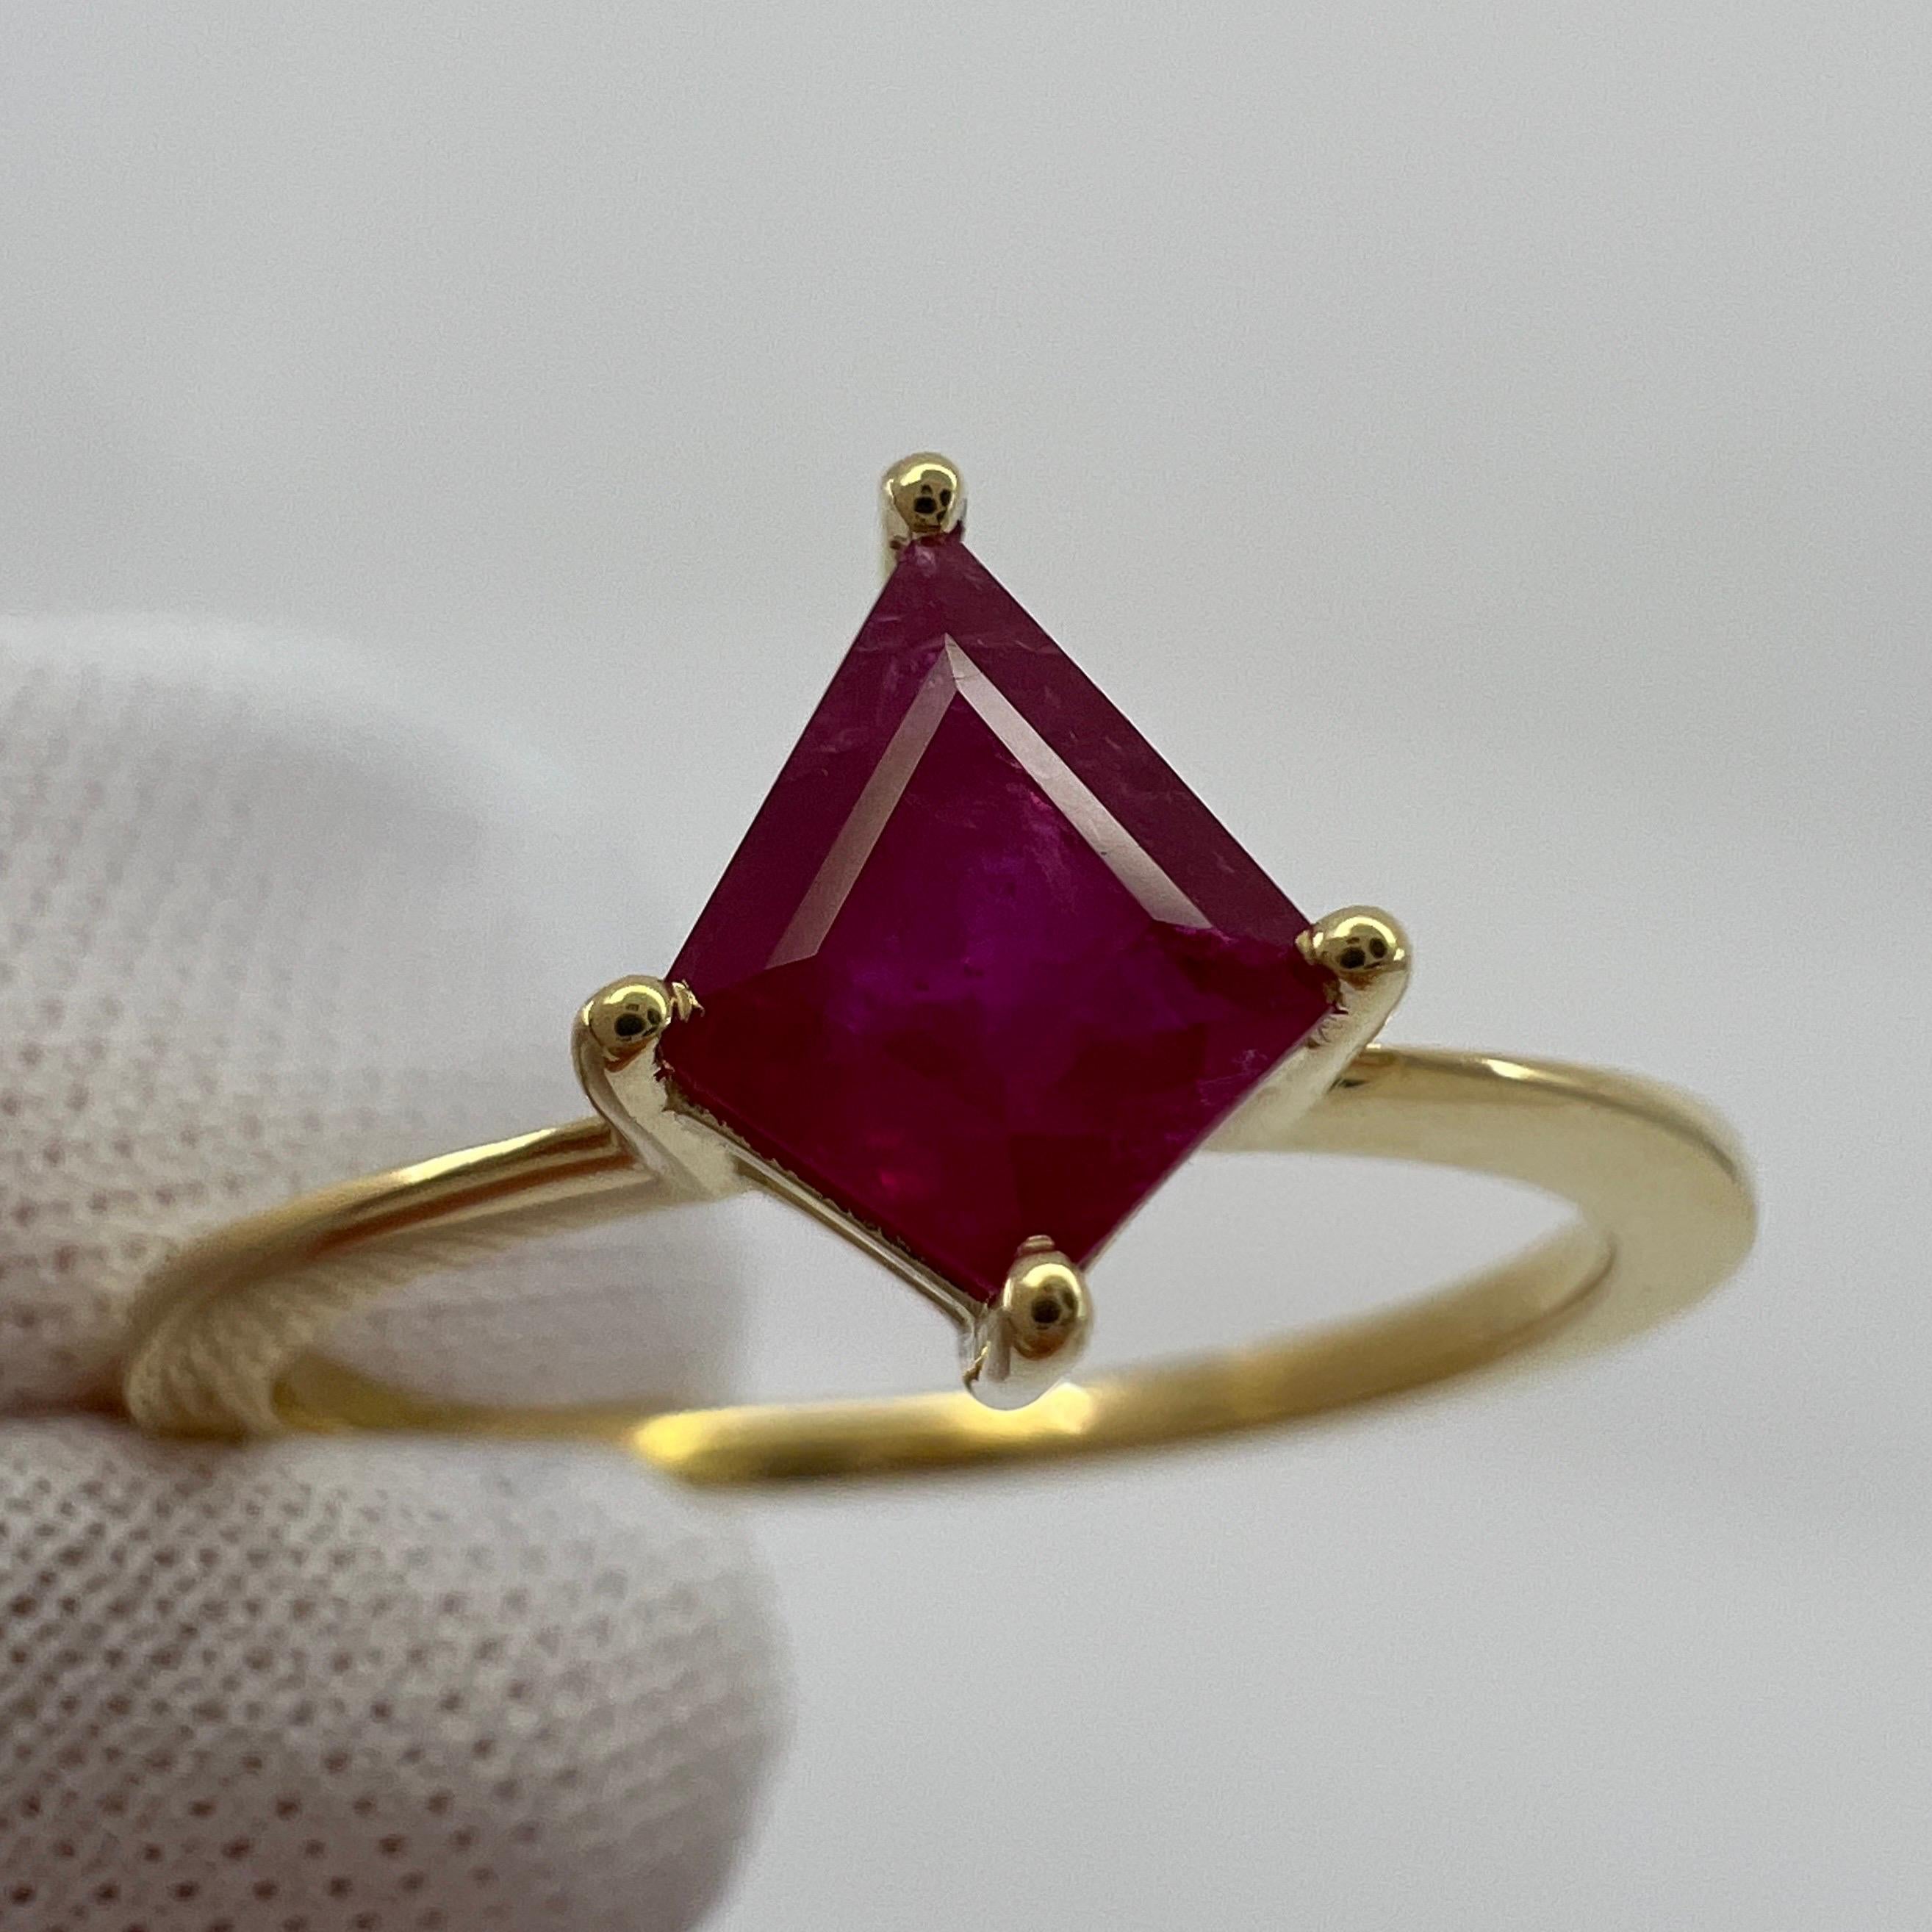 0.73 Carat Pinkish Red Ruby Fancy Kite Cut 18k Yellow Gold Modern Solitaire Ring For Sale 1